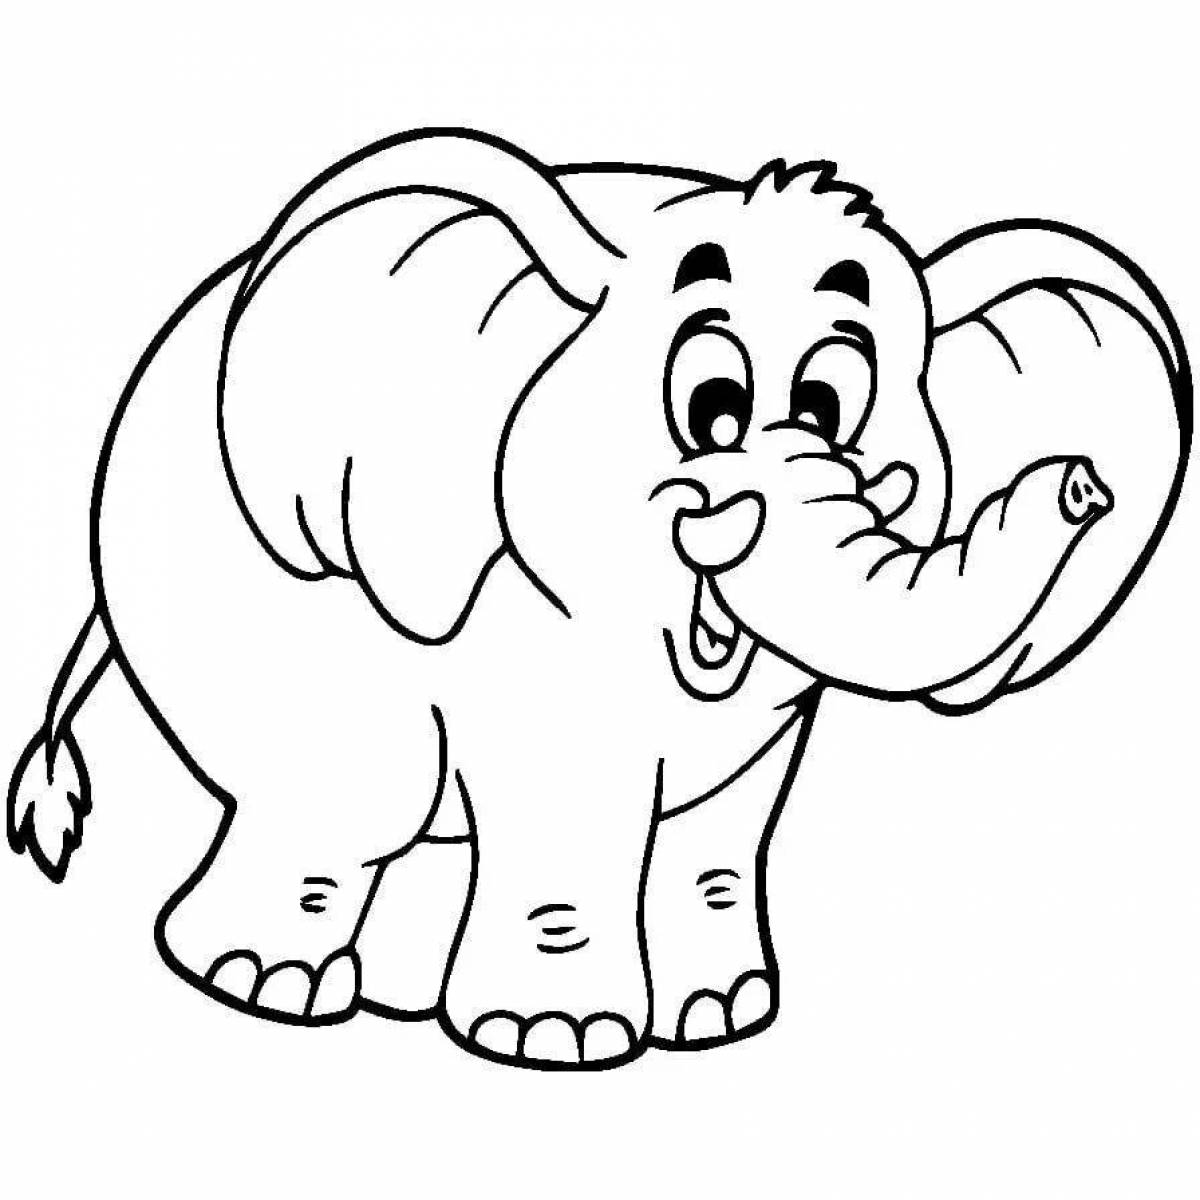 Animated elephant coloring book for 3-4 year olds